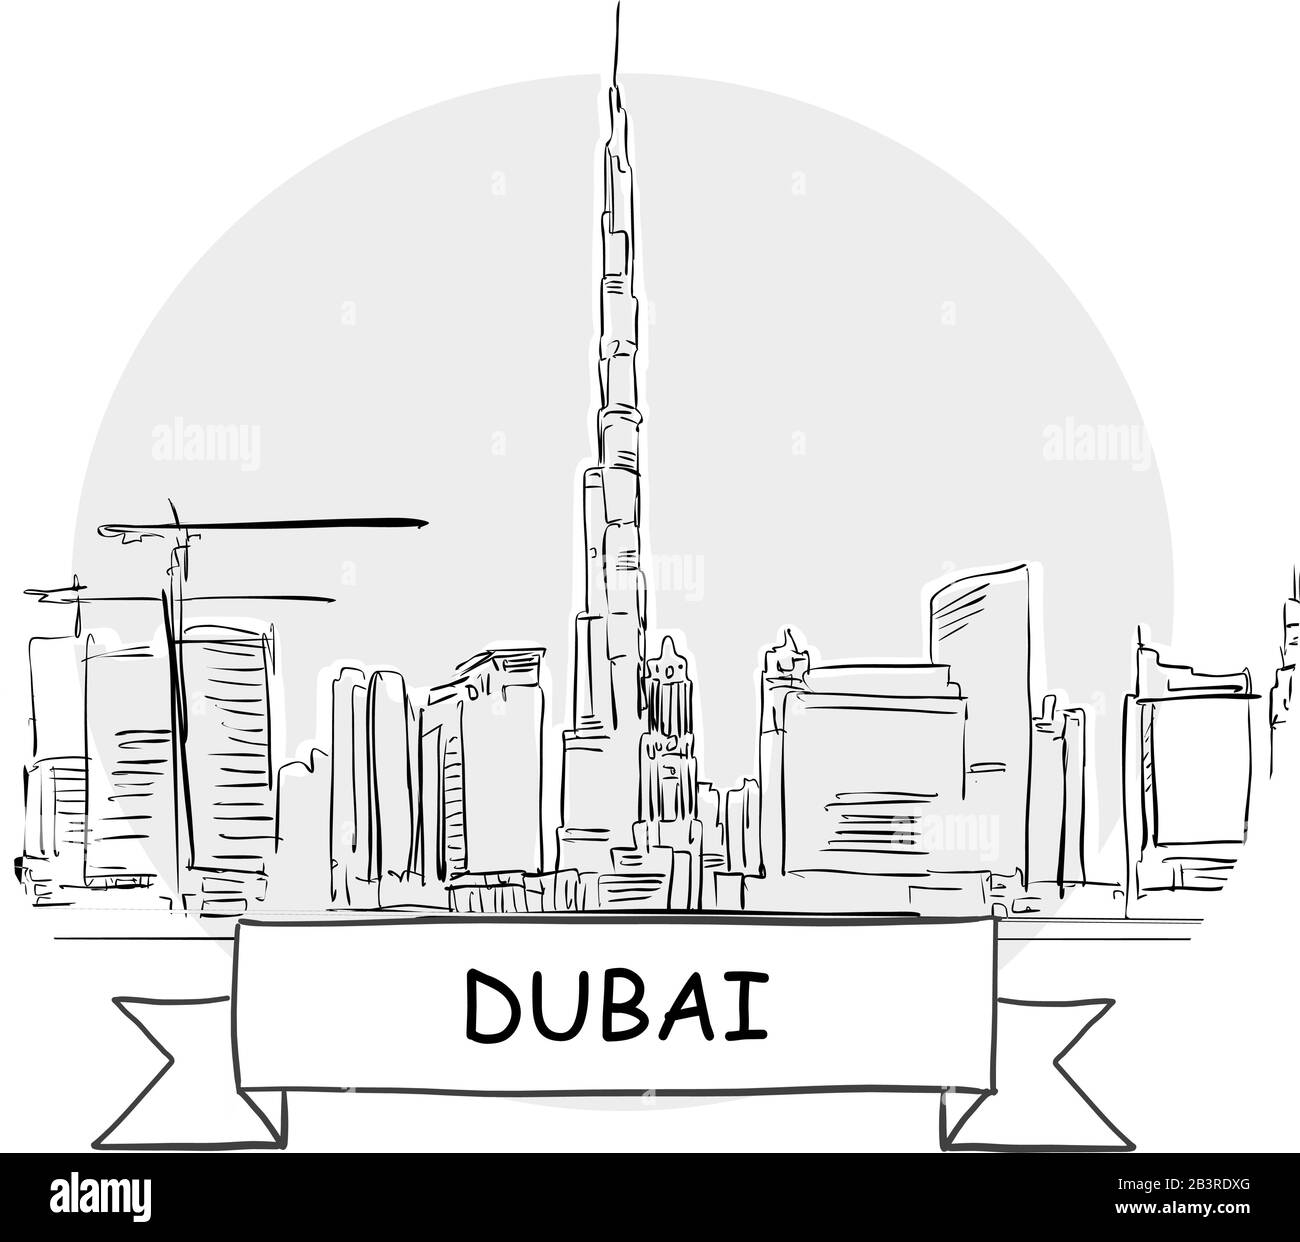 Dubai Hand-Drawn Urban Vector Sign. Black Line Art Illustration with Ribbon and Title. Stock Vector